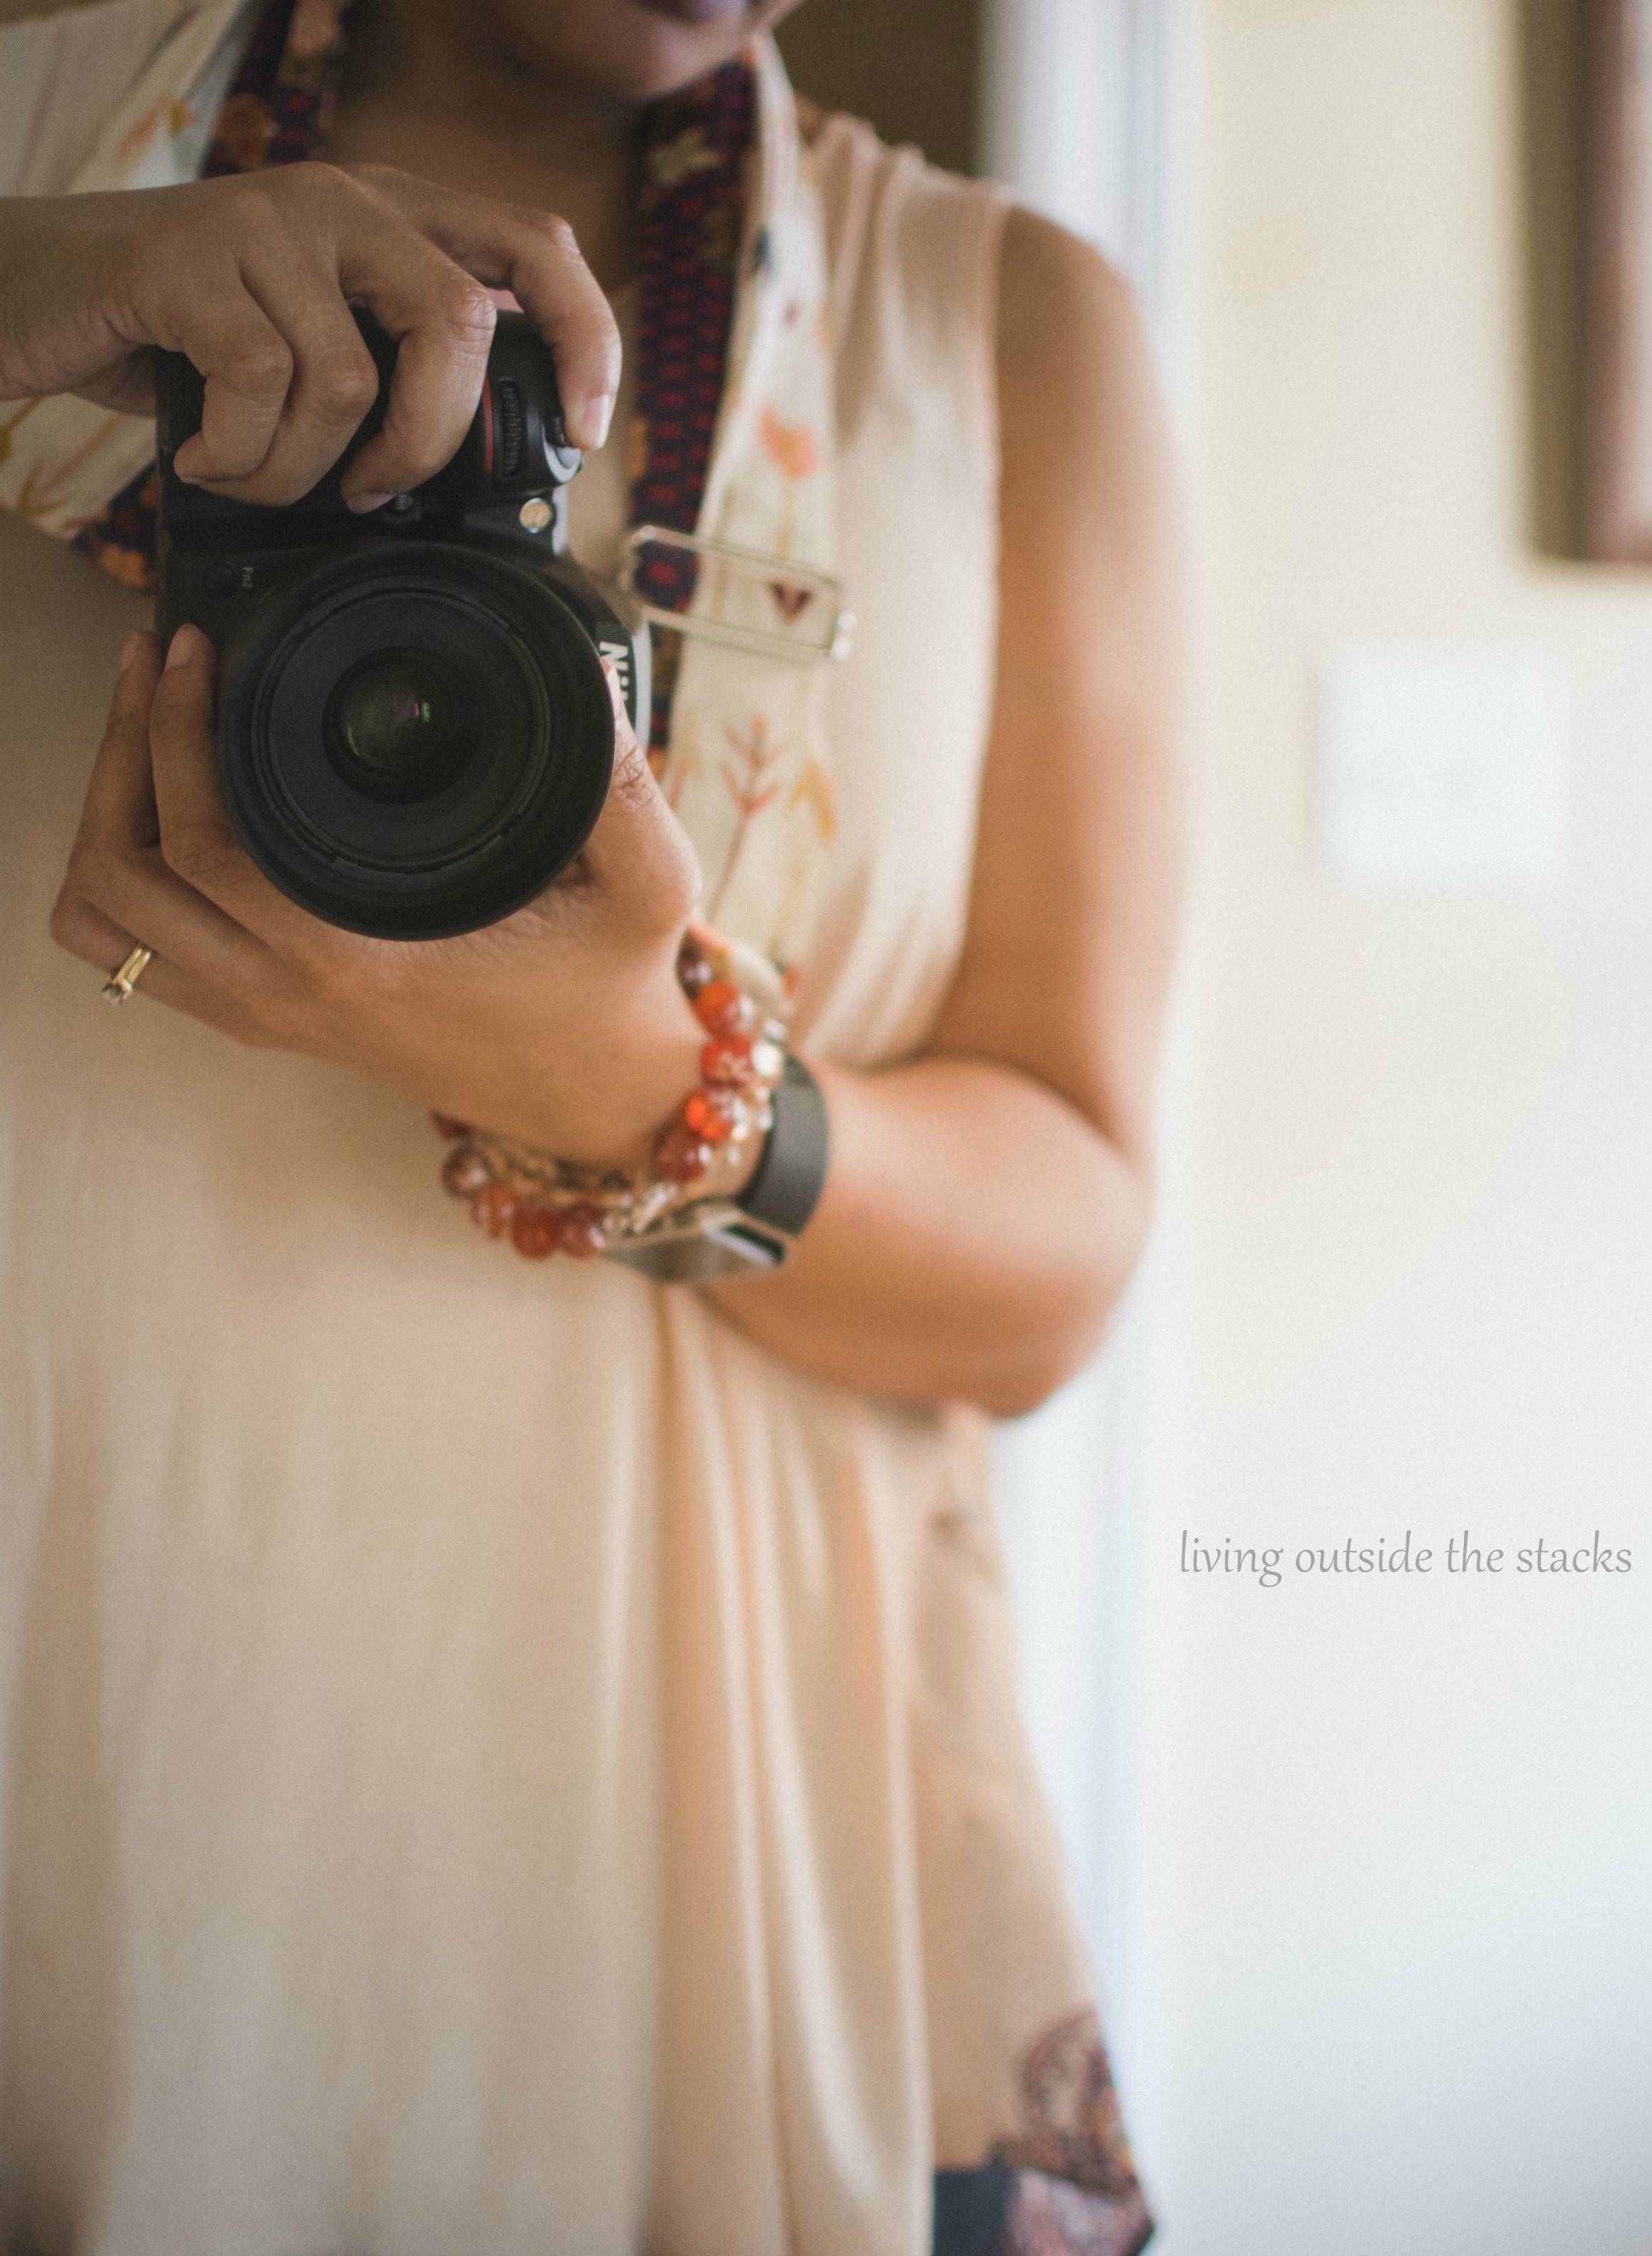 Product Review Chic Threads by Amy Camera Strap {living outside the stacks} #LivingOutsideTheStacks #TeamLOTS